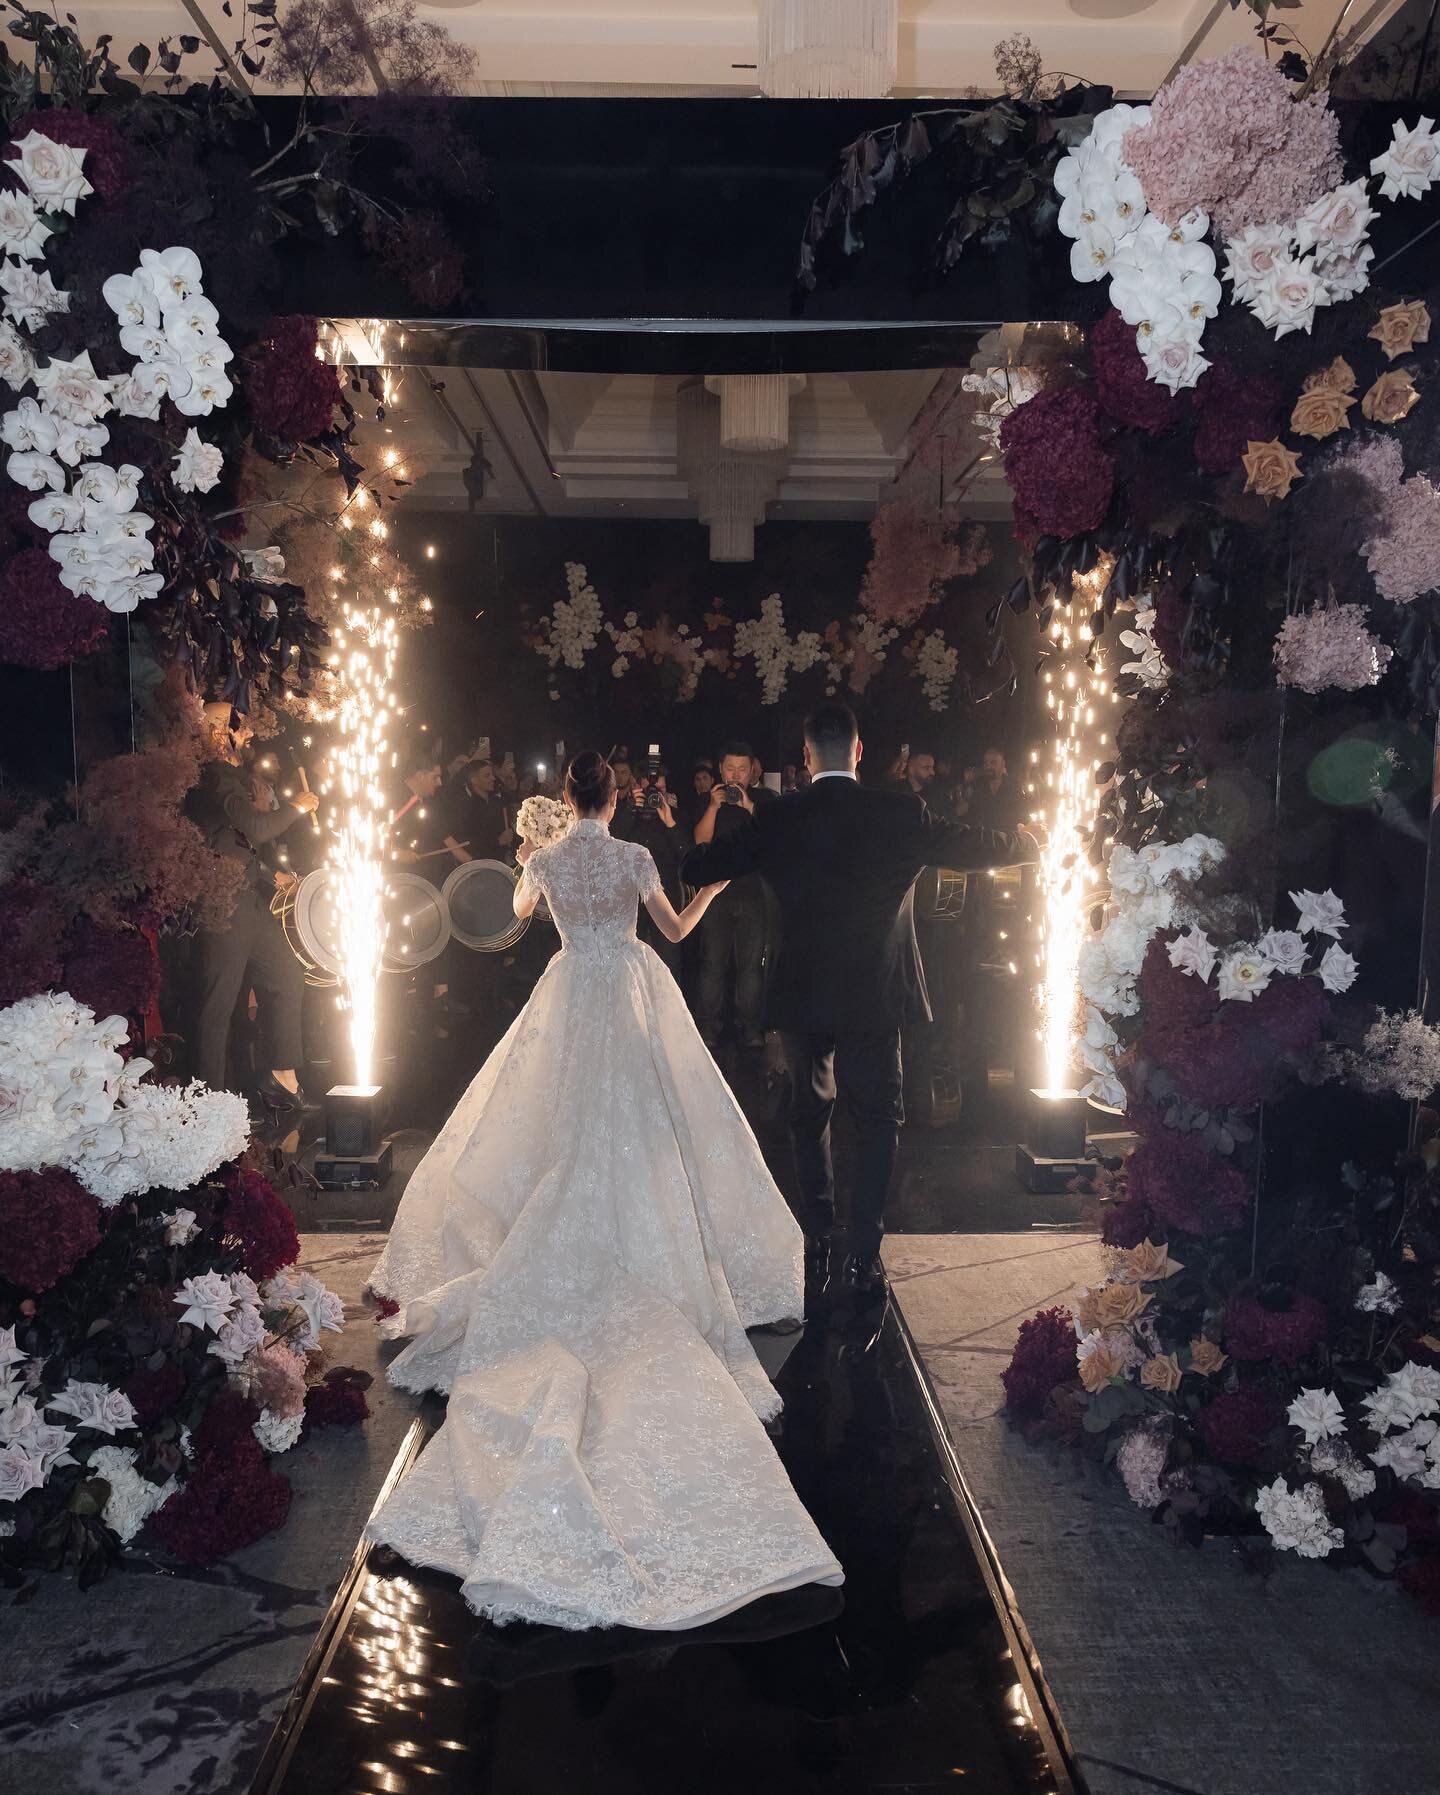 P X H 

Styling + Coordination @kaileykirkeventsandweddings 

Photography @georgejohnphotography Video @saltatelier_wedding Gown @steven_khalil Hair @dodiejayhair Makeup @tannia_t_mua Florals @montana__flora Lighting @jayproductionsevents Candles @ca